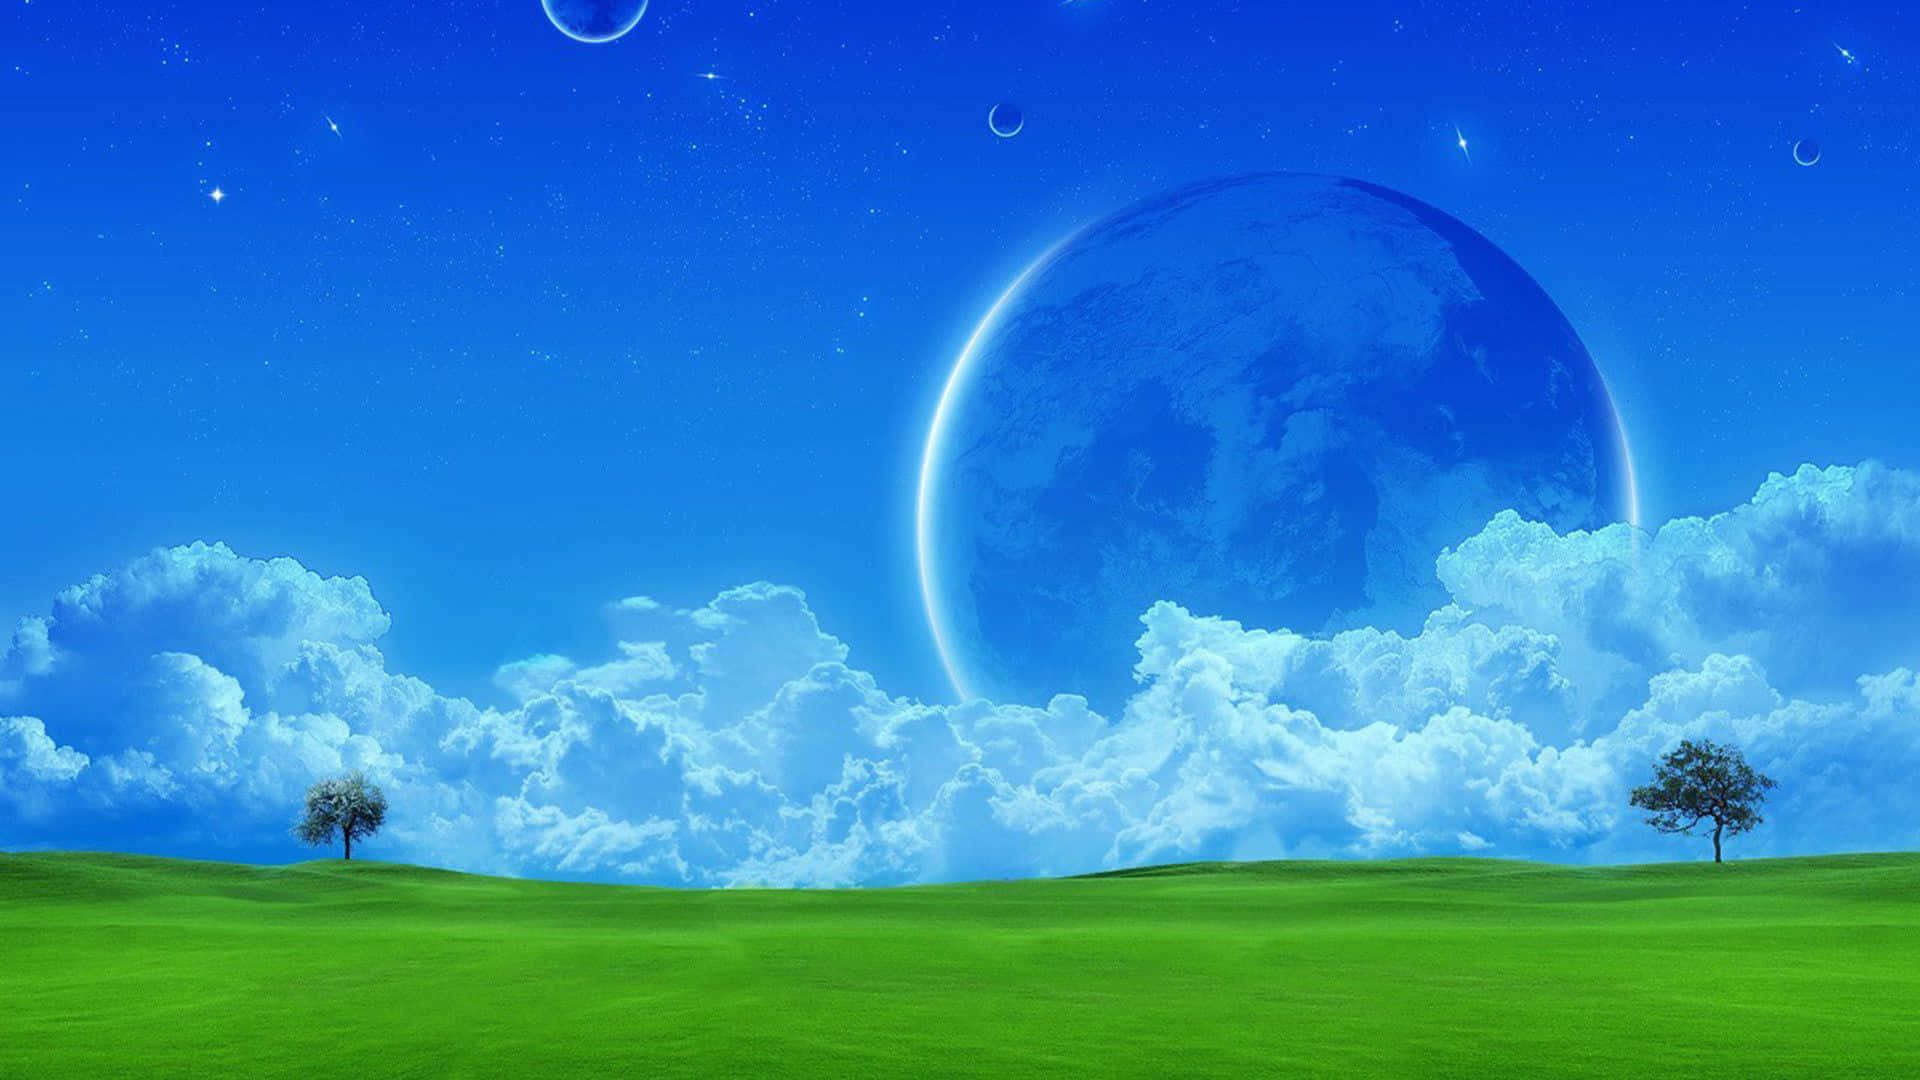 Best Desktop Pc Background Blue Sky With Planets And Green Field Background